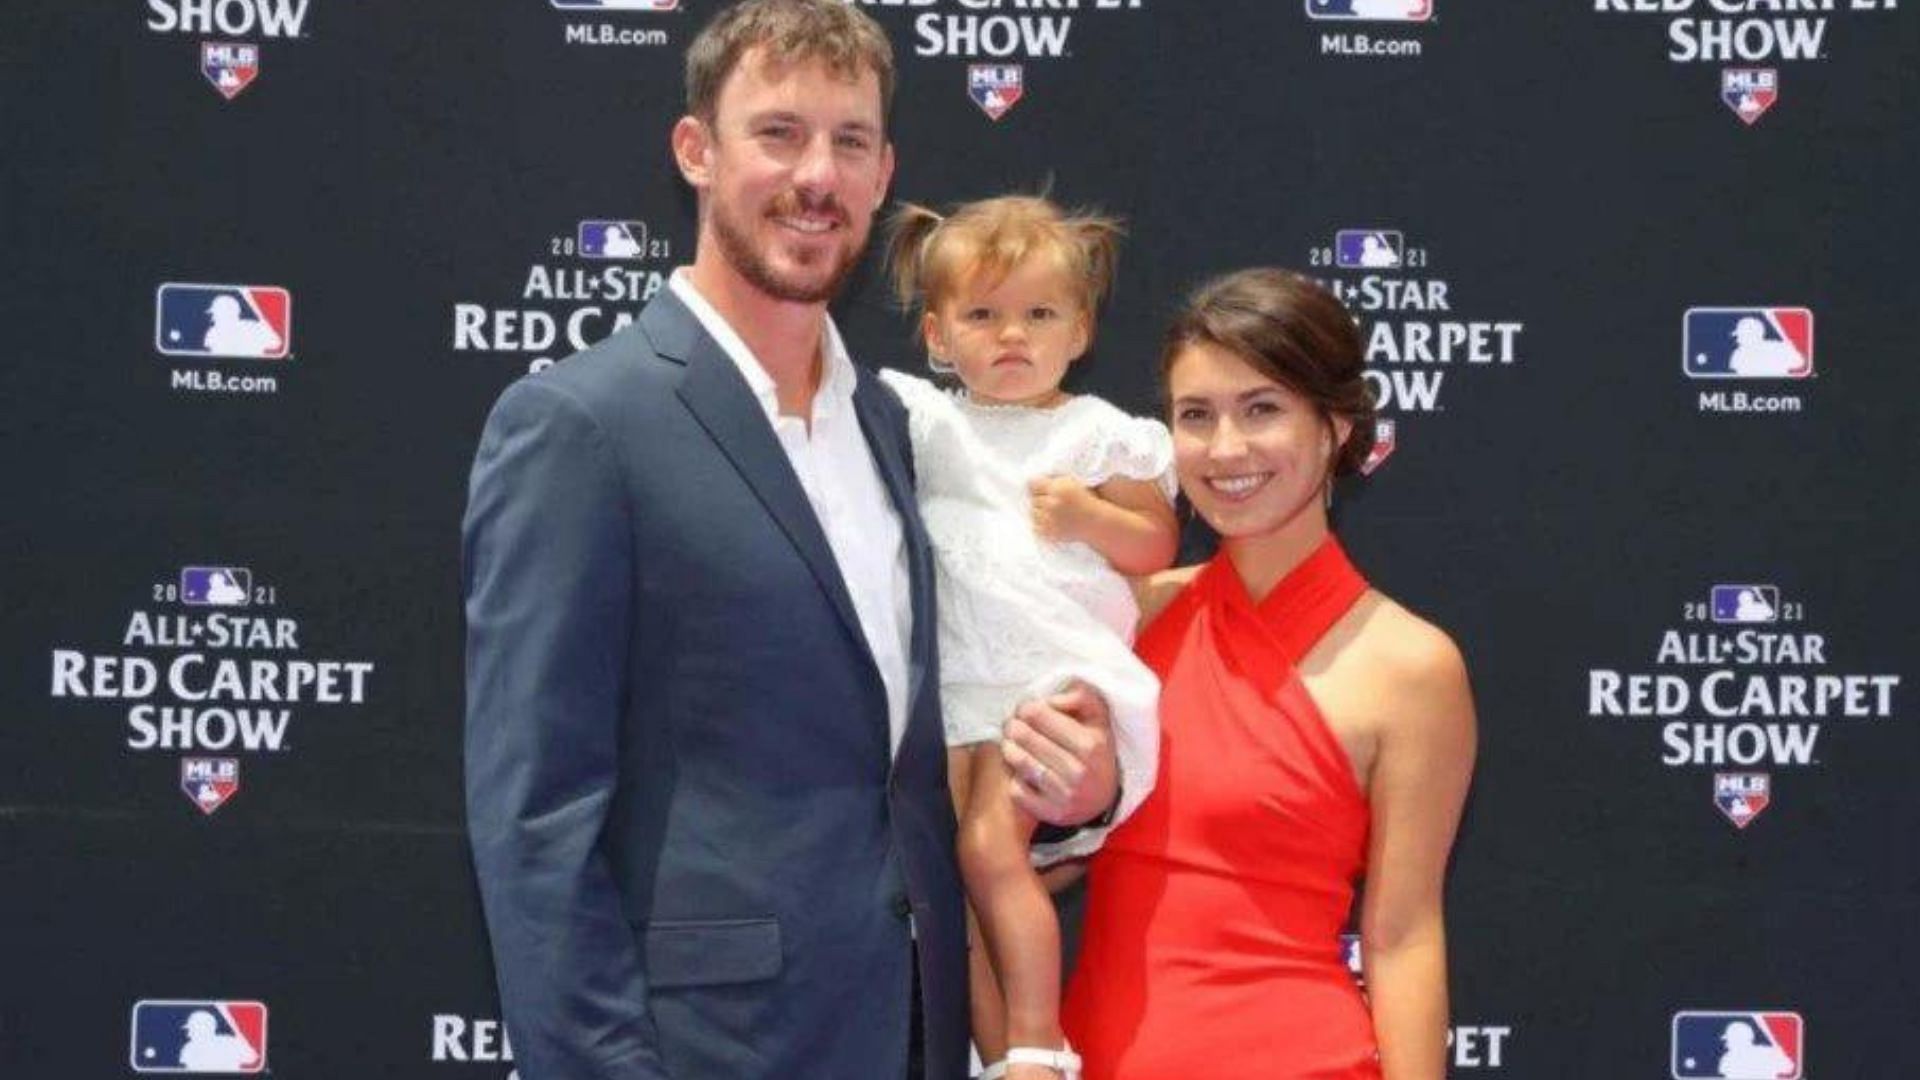 Chris bassitt and his wife Jessica with their daughter